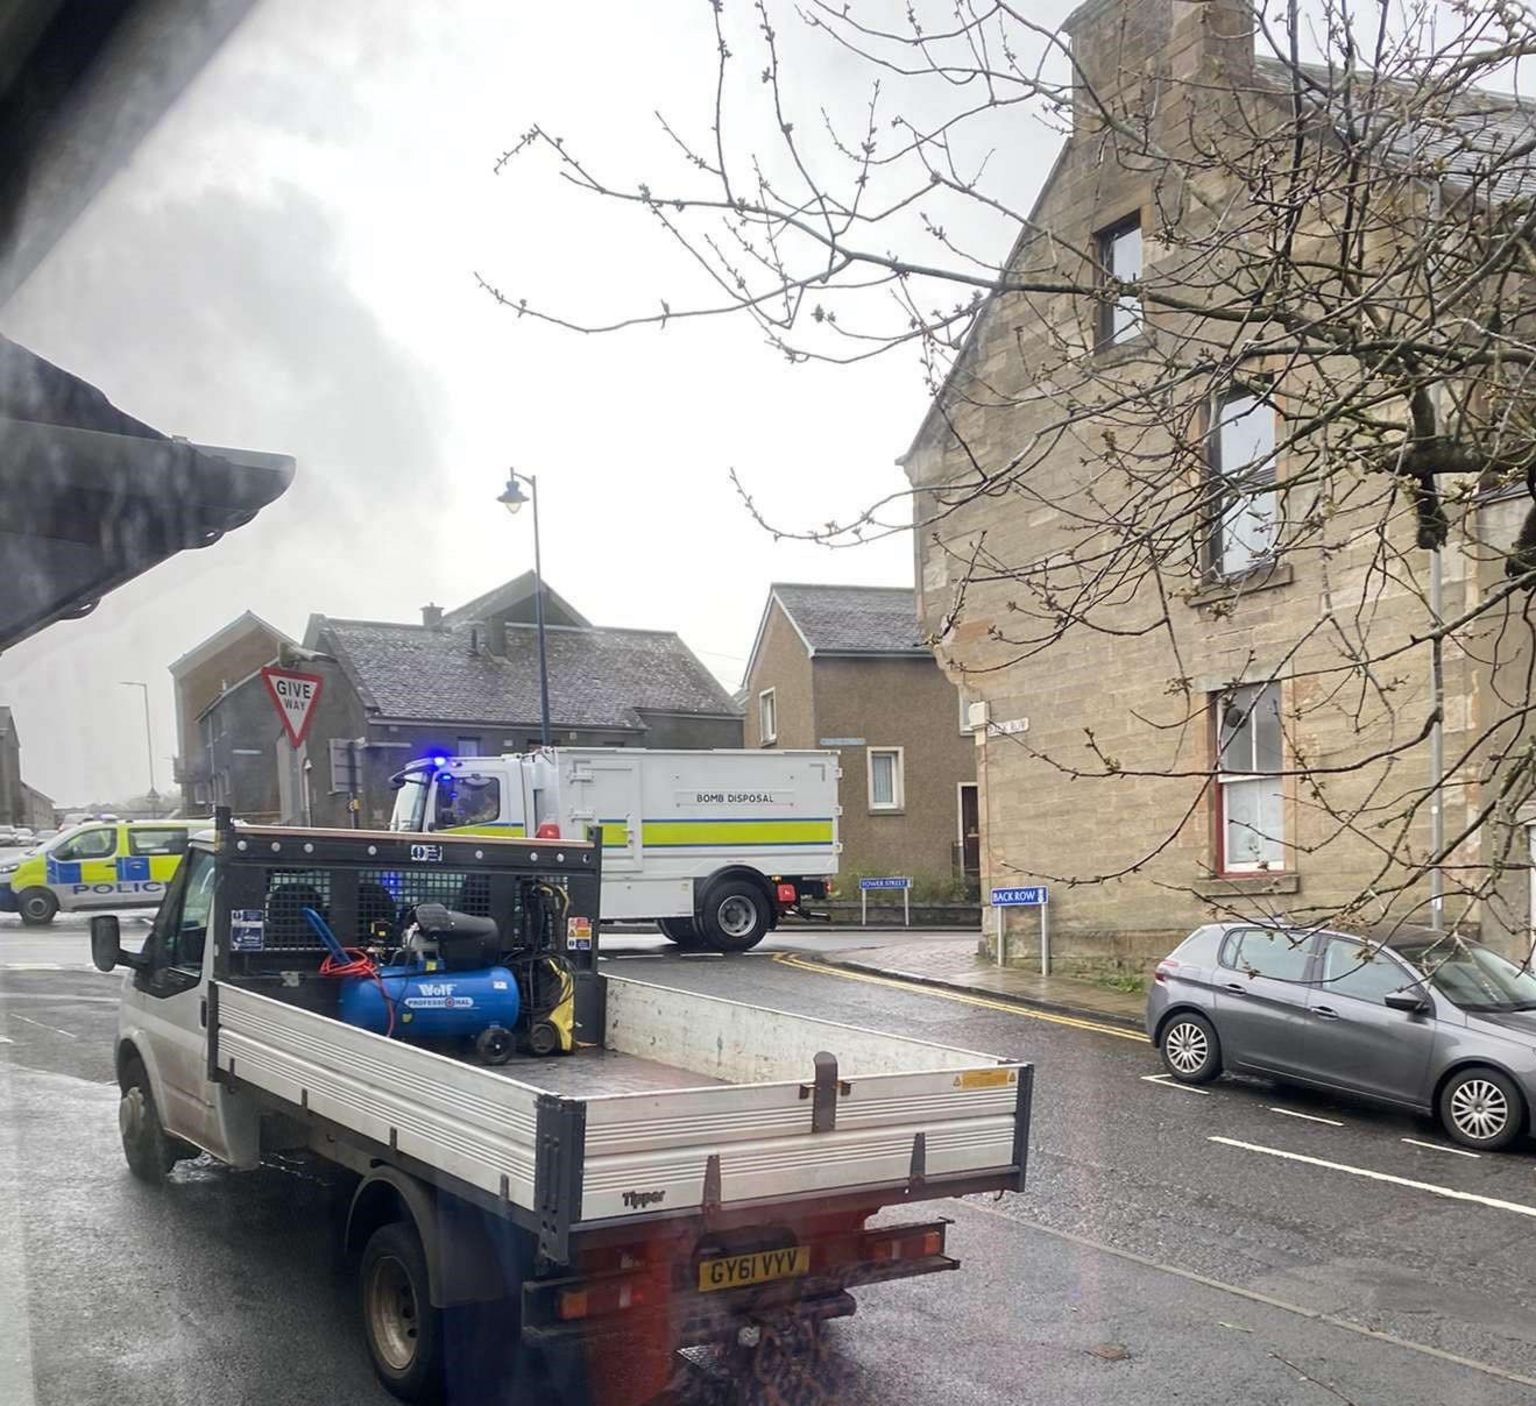 A bomb disposal vehicle arriving in Selkirk